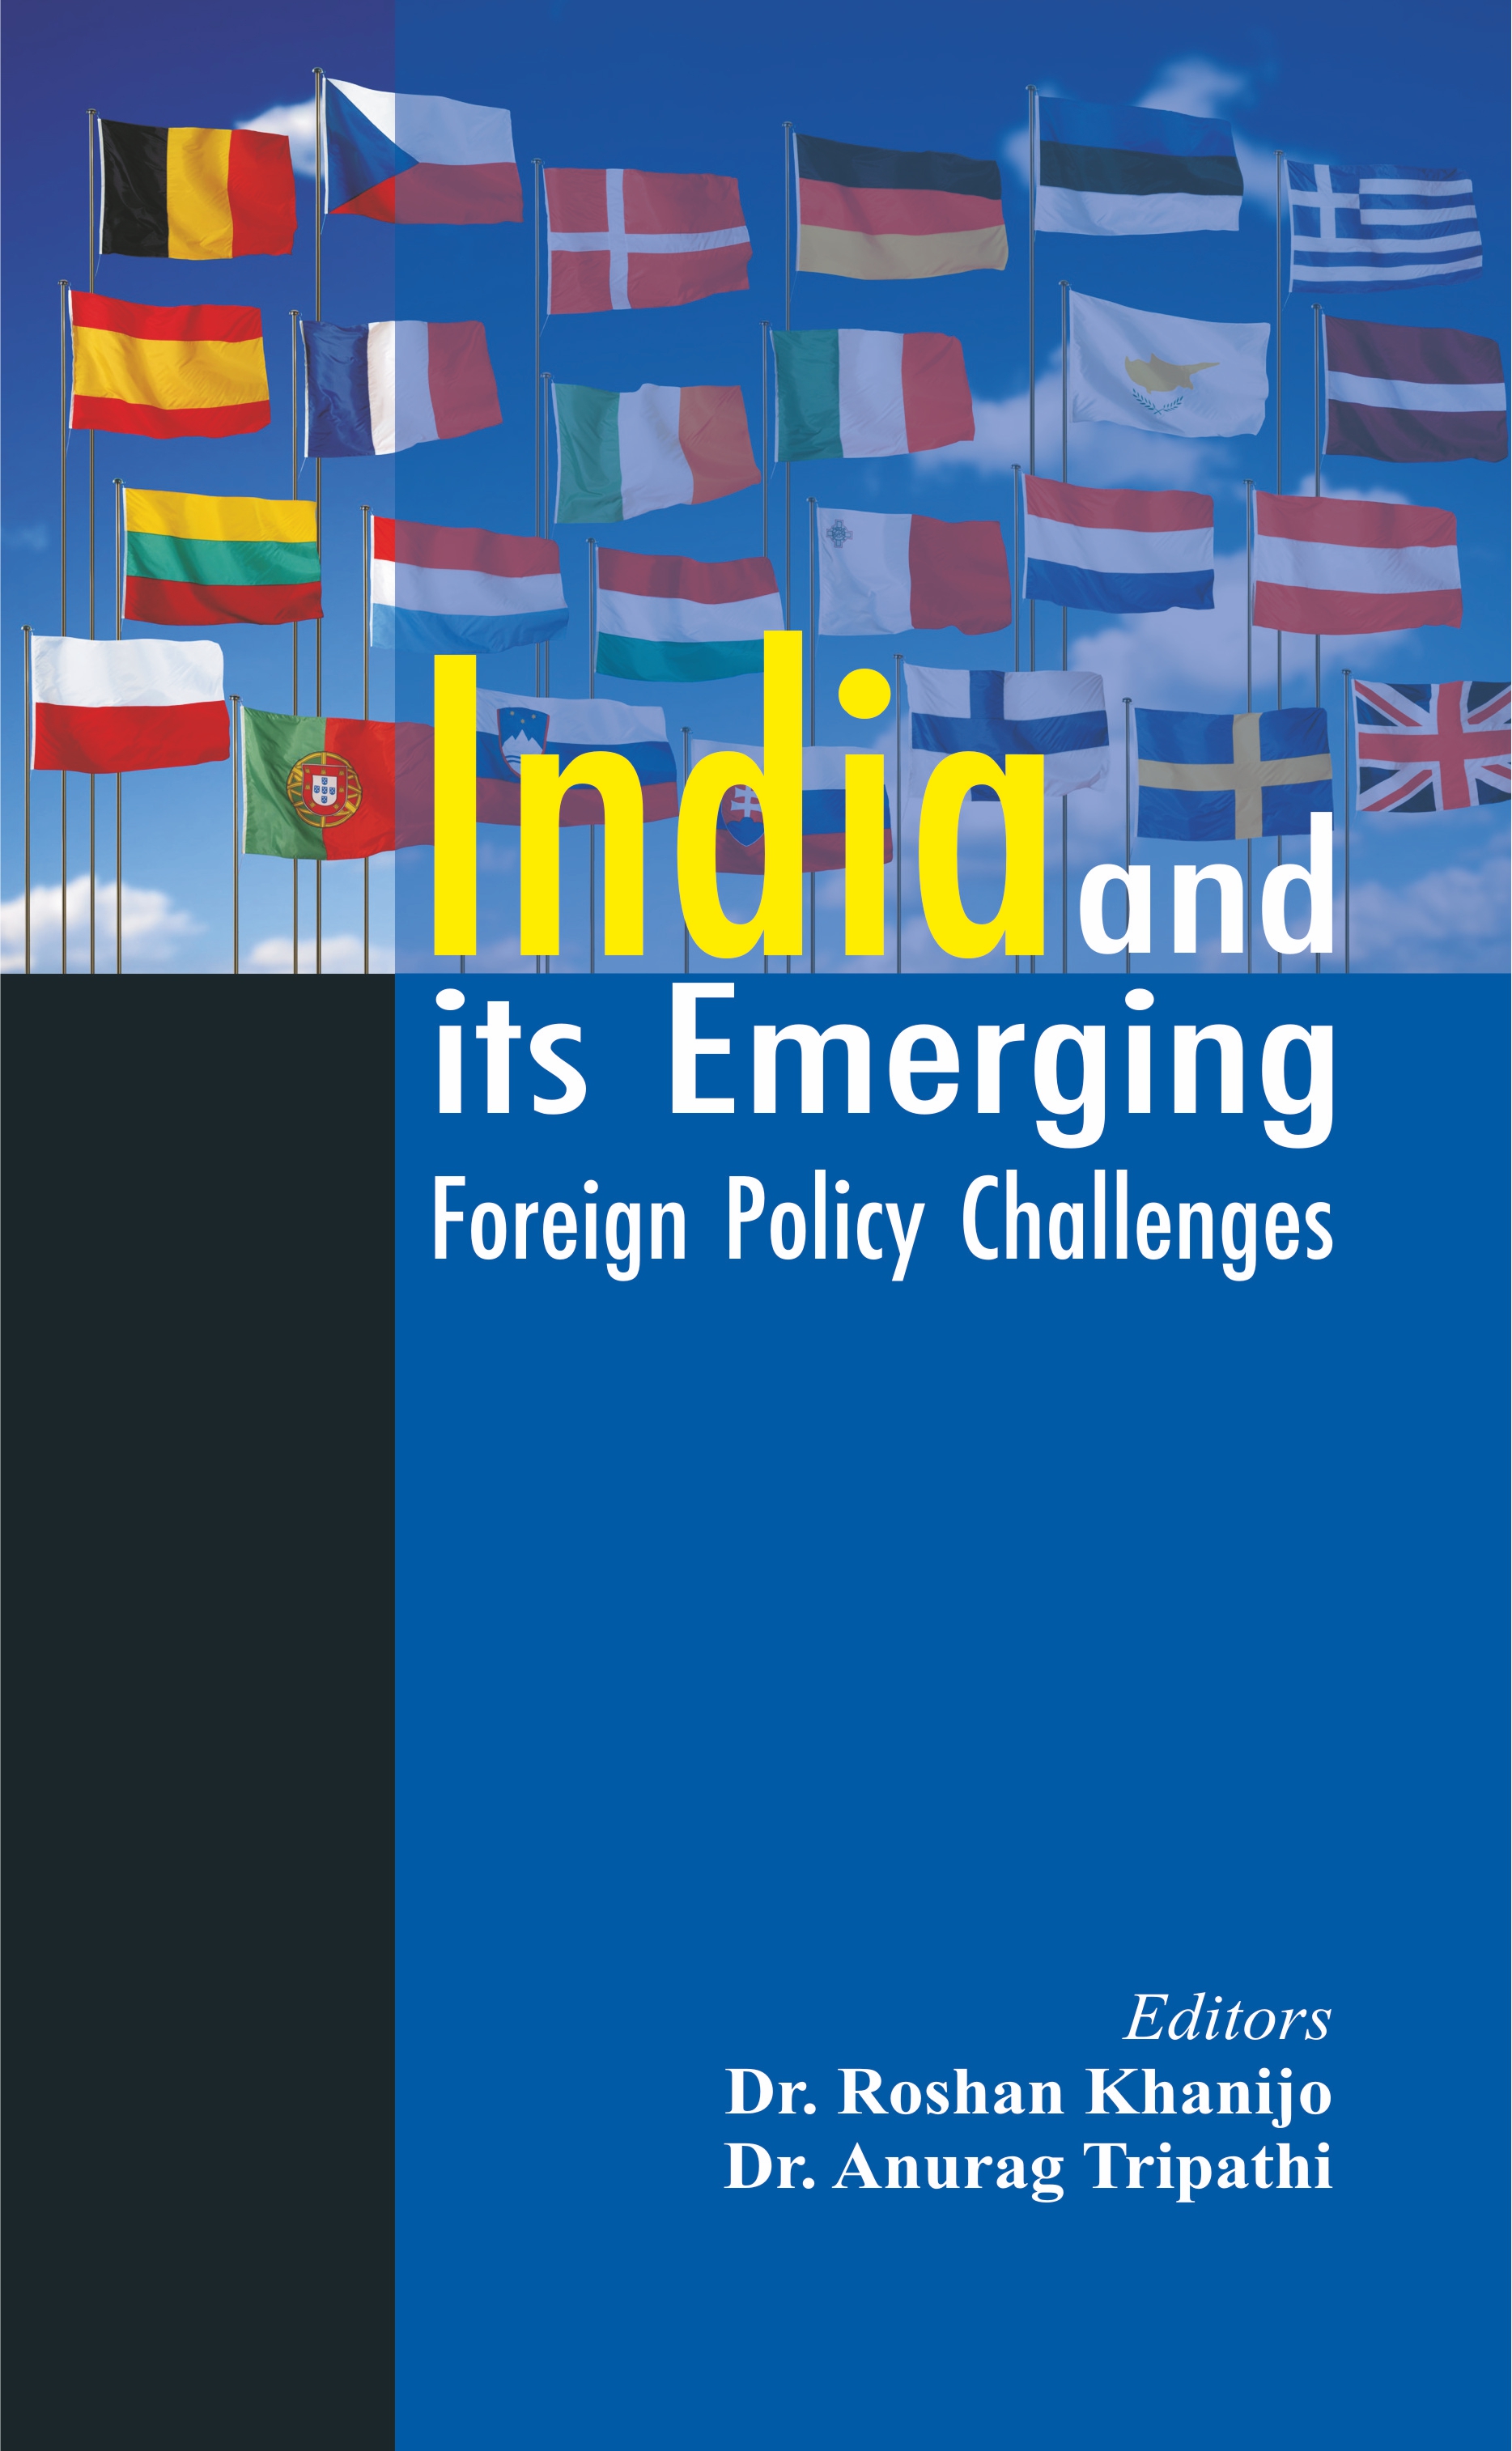 India and its Emerging Foreign Policy Challenges